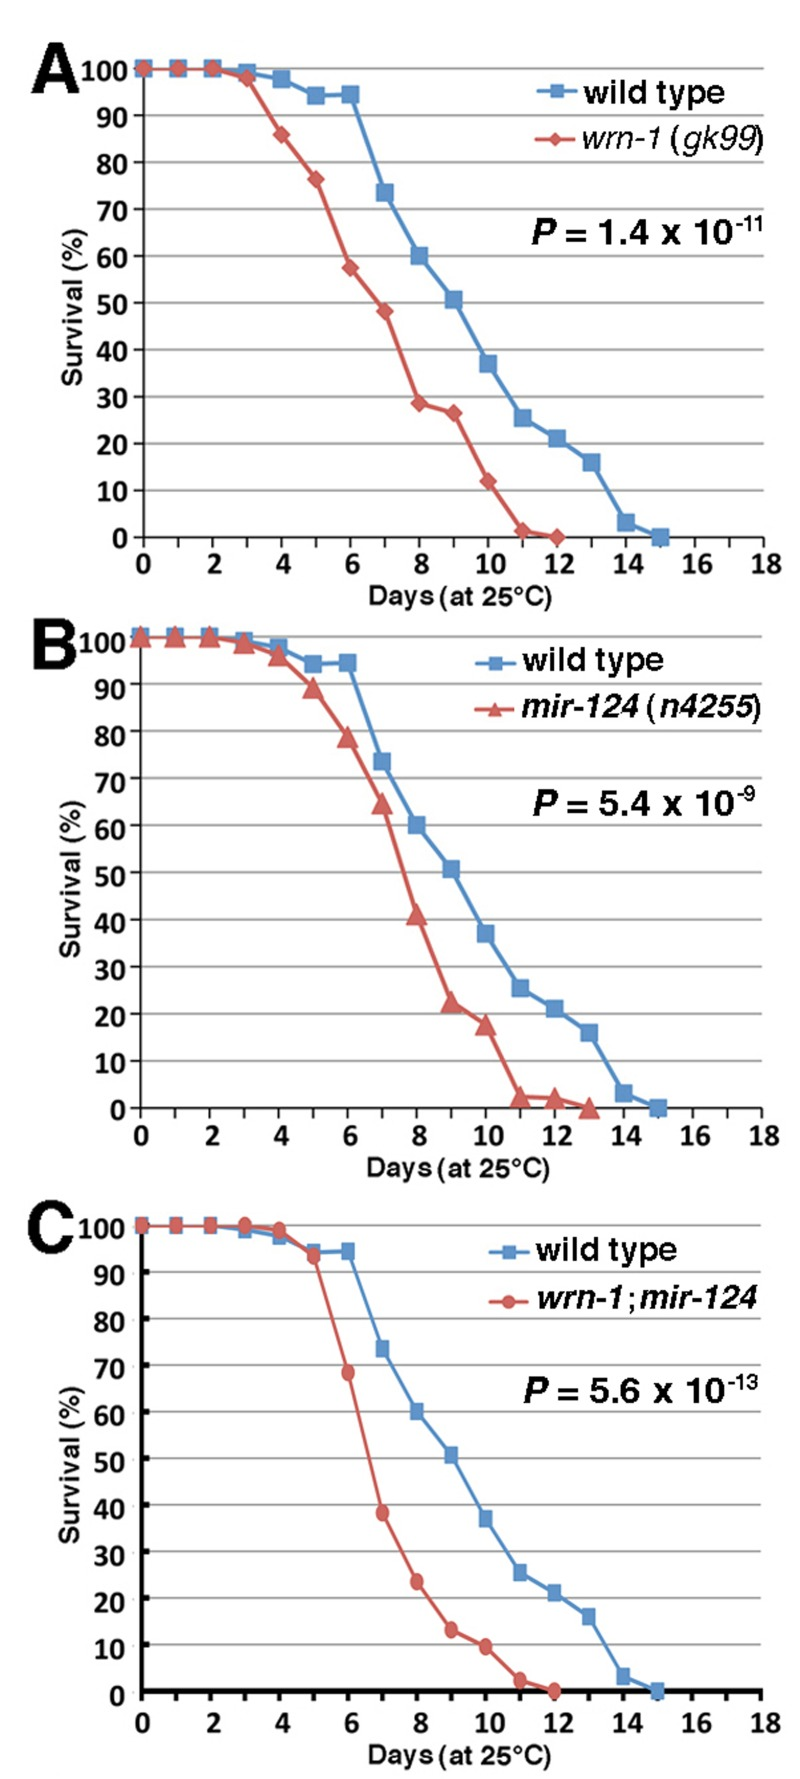 Life span of wild type and mutant C. elegans animals. (A) Survival curves of wild type (N2) and wrn-1(gk99) animals grown at 25°C. (B) Survival curves of wild type (N2) and mir-124 (n4255) strains grown at 25°C. (C) Survival curves of wild type (N2) and wrn-1;mir-124 double mutant animals grown at 25°C. All experiments were performed with five different pools of 20 to 30 animals of each genotype. The indicated P-values were obtained using the log-rank test method.